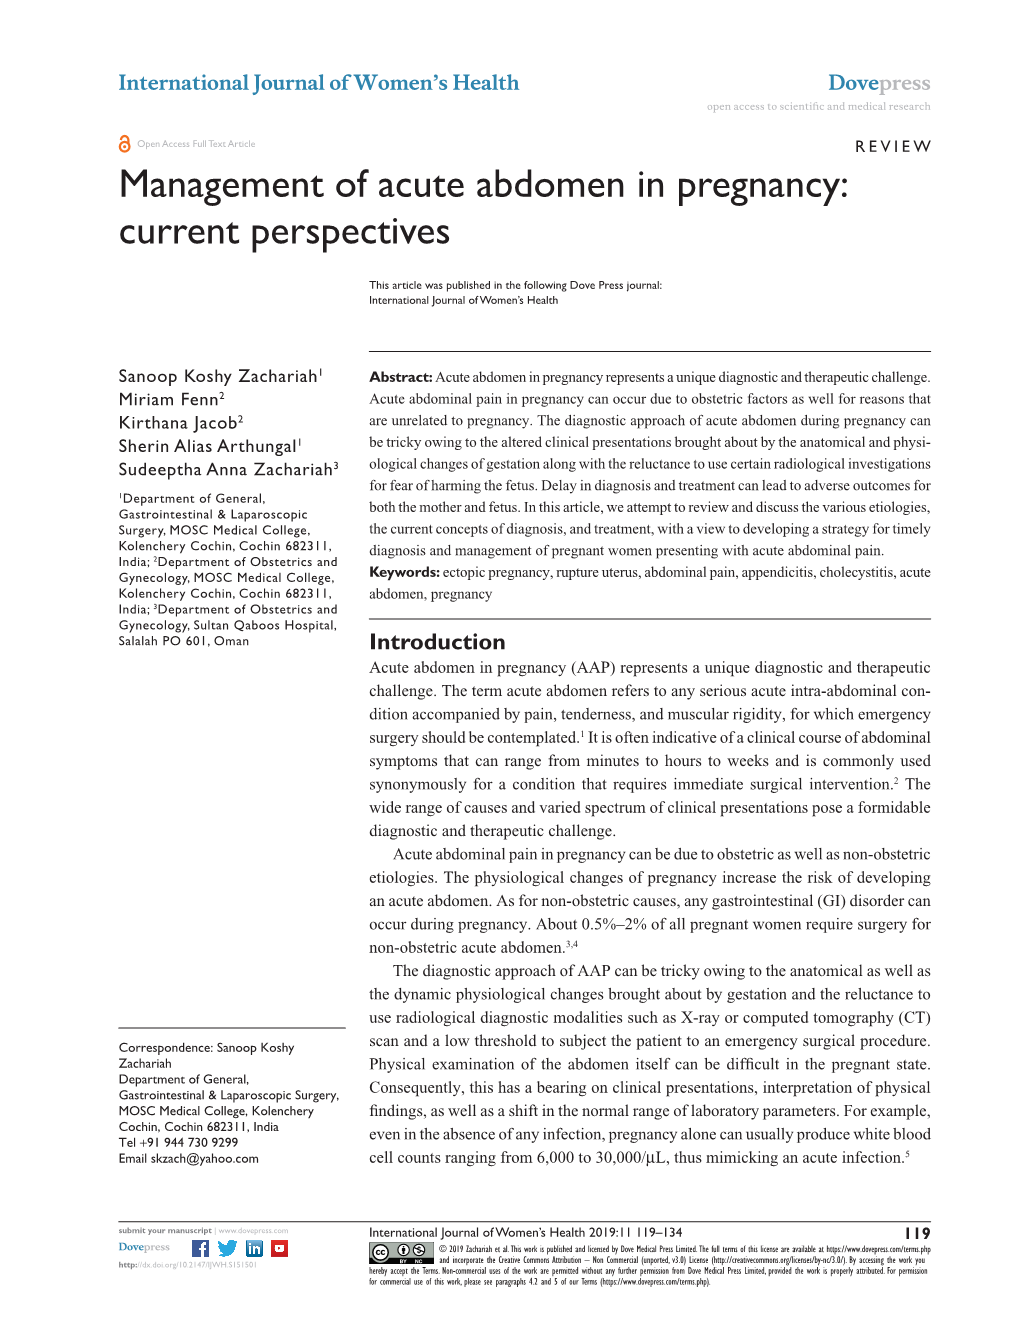 Management of Acute Abdomen in Pregnancy: Current Perspectives